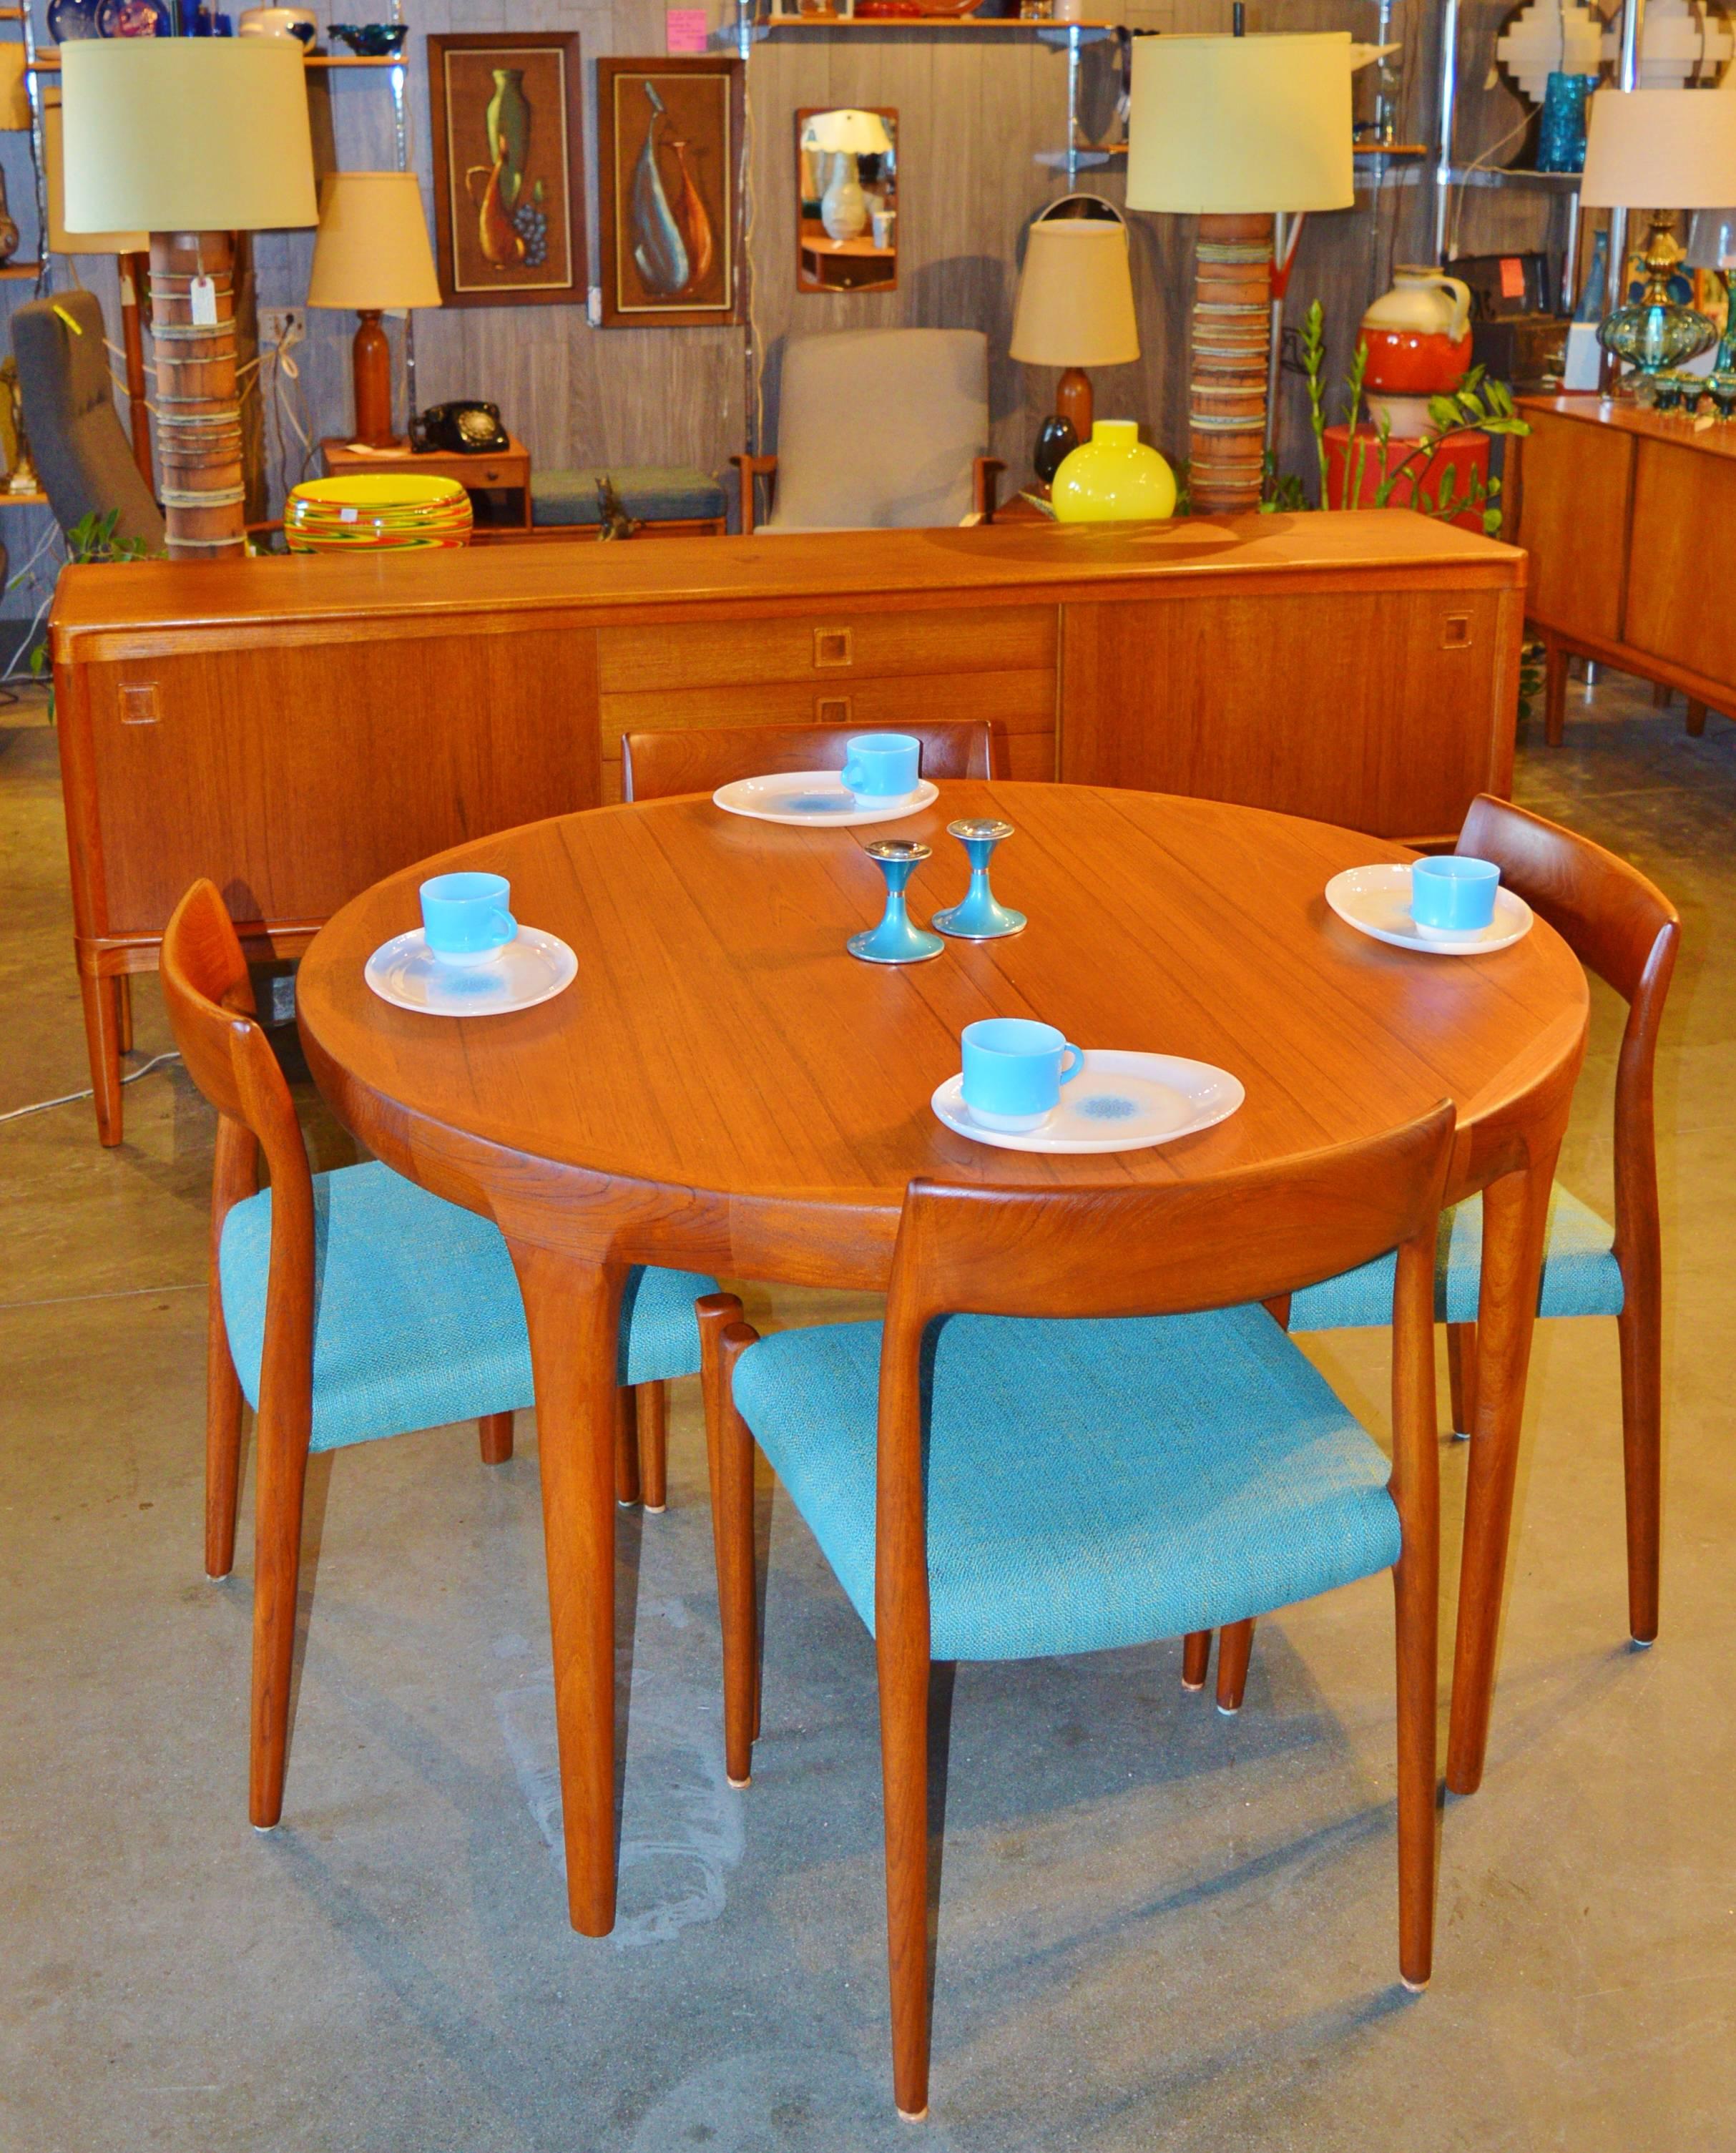 This absolutely stunning Danish Modern teak dining table was designed by Ib Kofod Larsen for Faarup Møbelfabrik in the 1950s. Featuring a gorgeous thick top that contours and blends with the tapering legs. Super practical, it starts as a round table